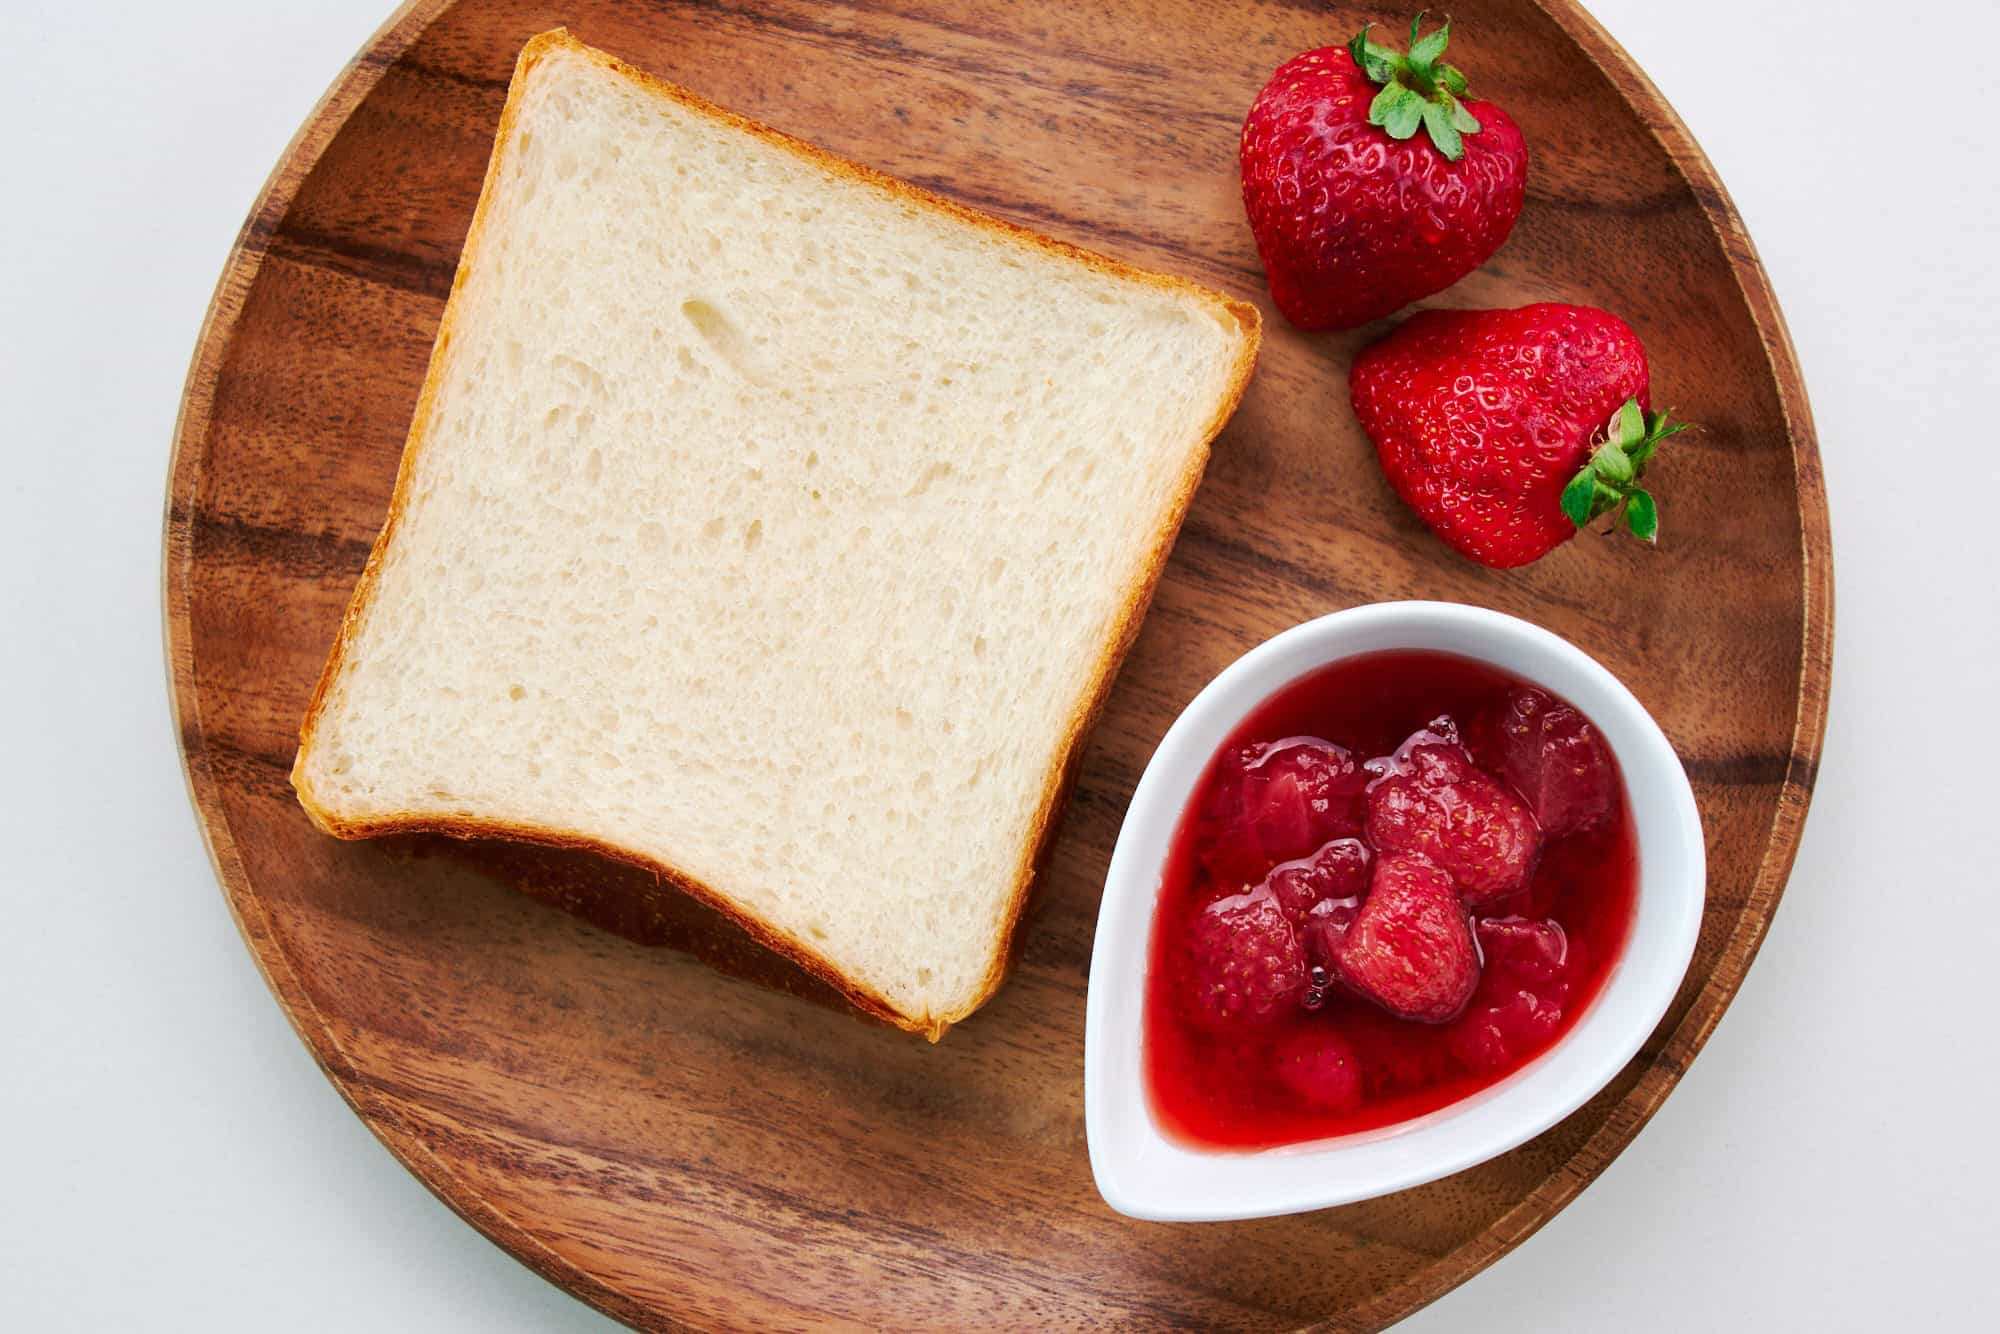 Bread, strawberries, and Strawberry Preserves.